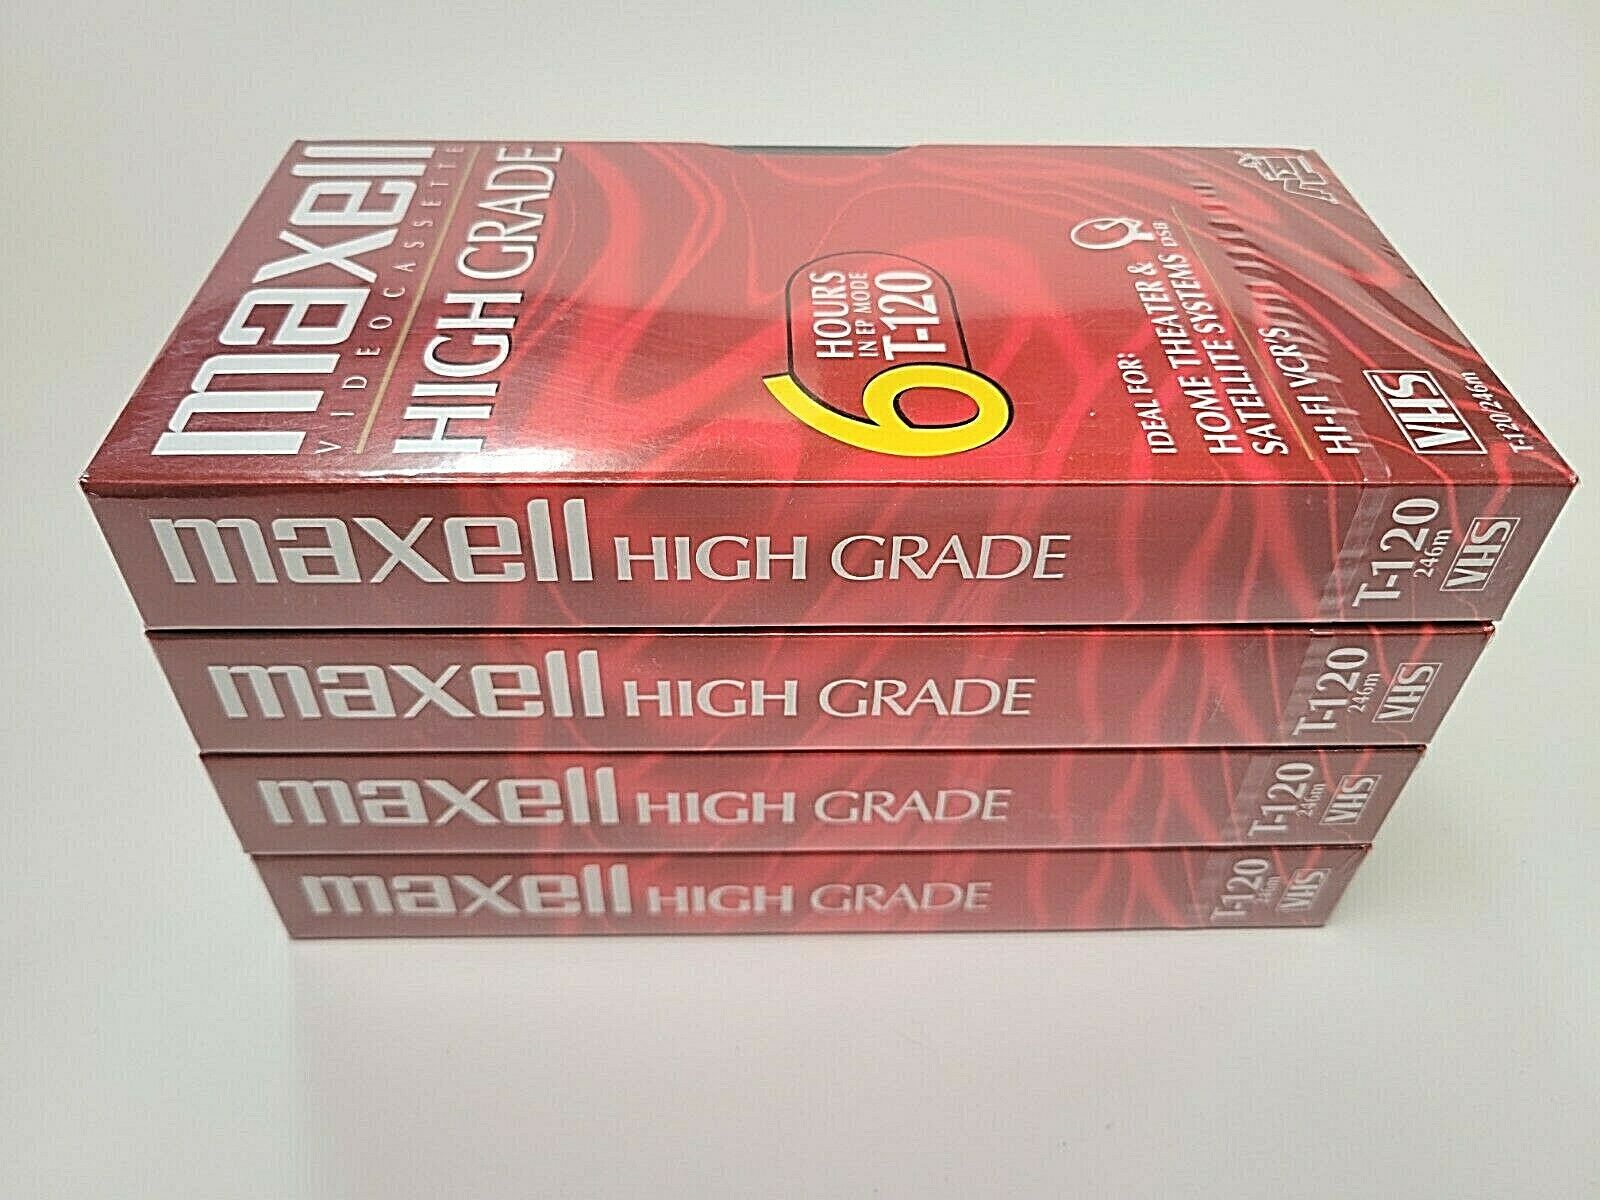 Maxell Lot Of 4 Blank Video Cassette Tapes High Grade 6 Hours T-120 New Vcr Tape